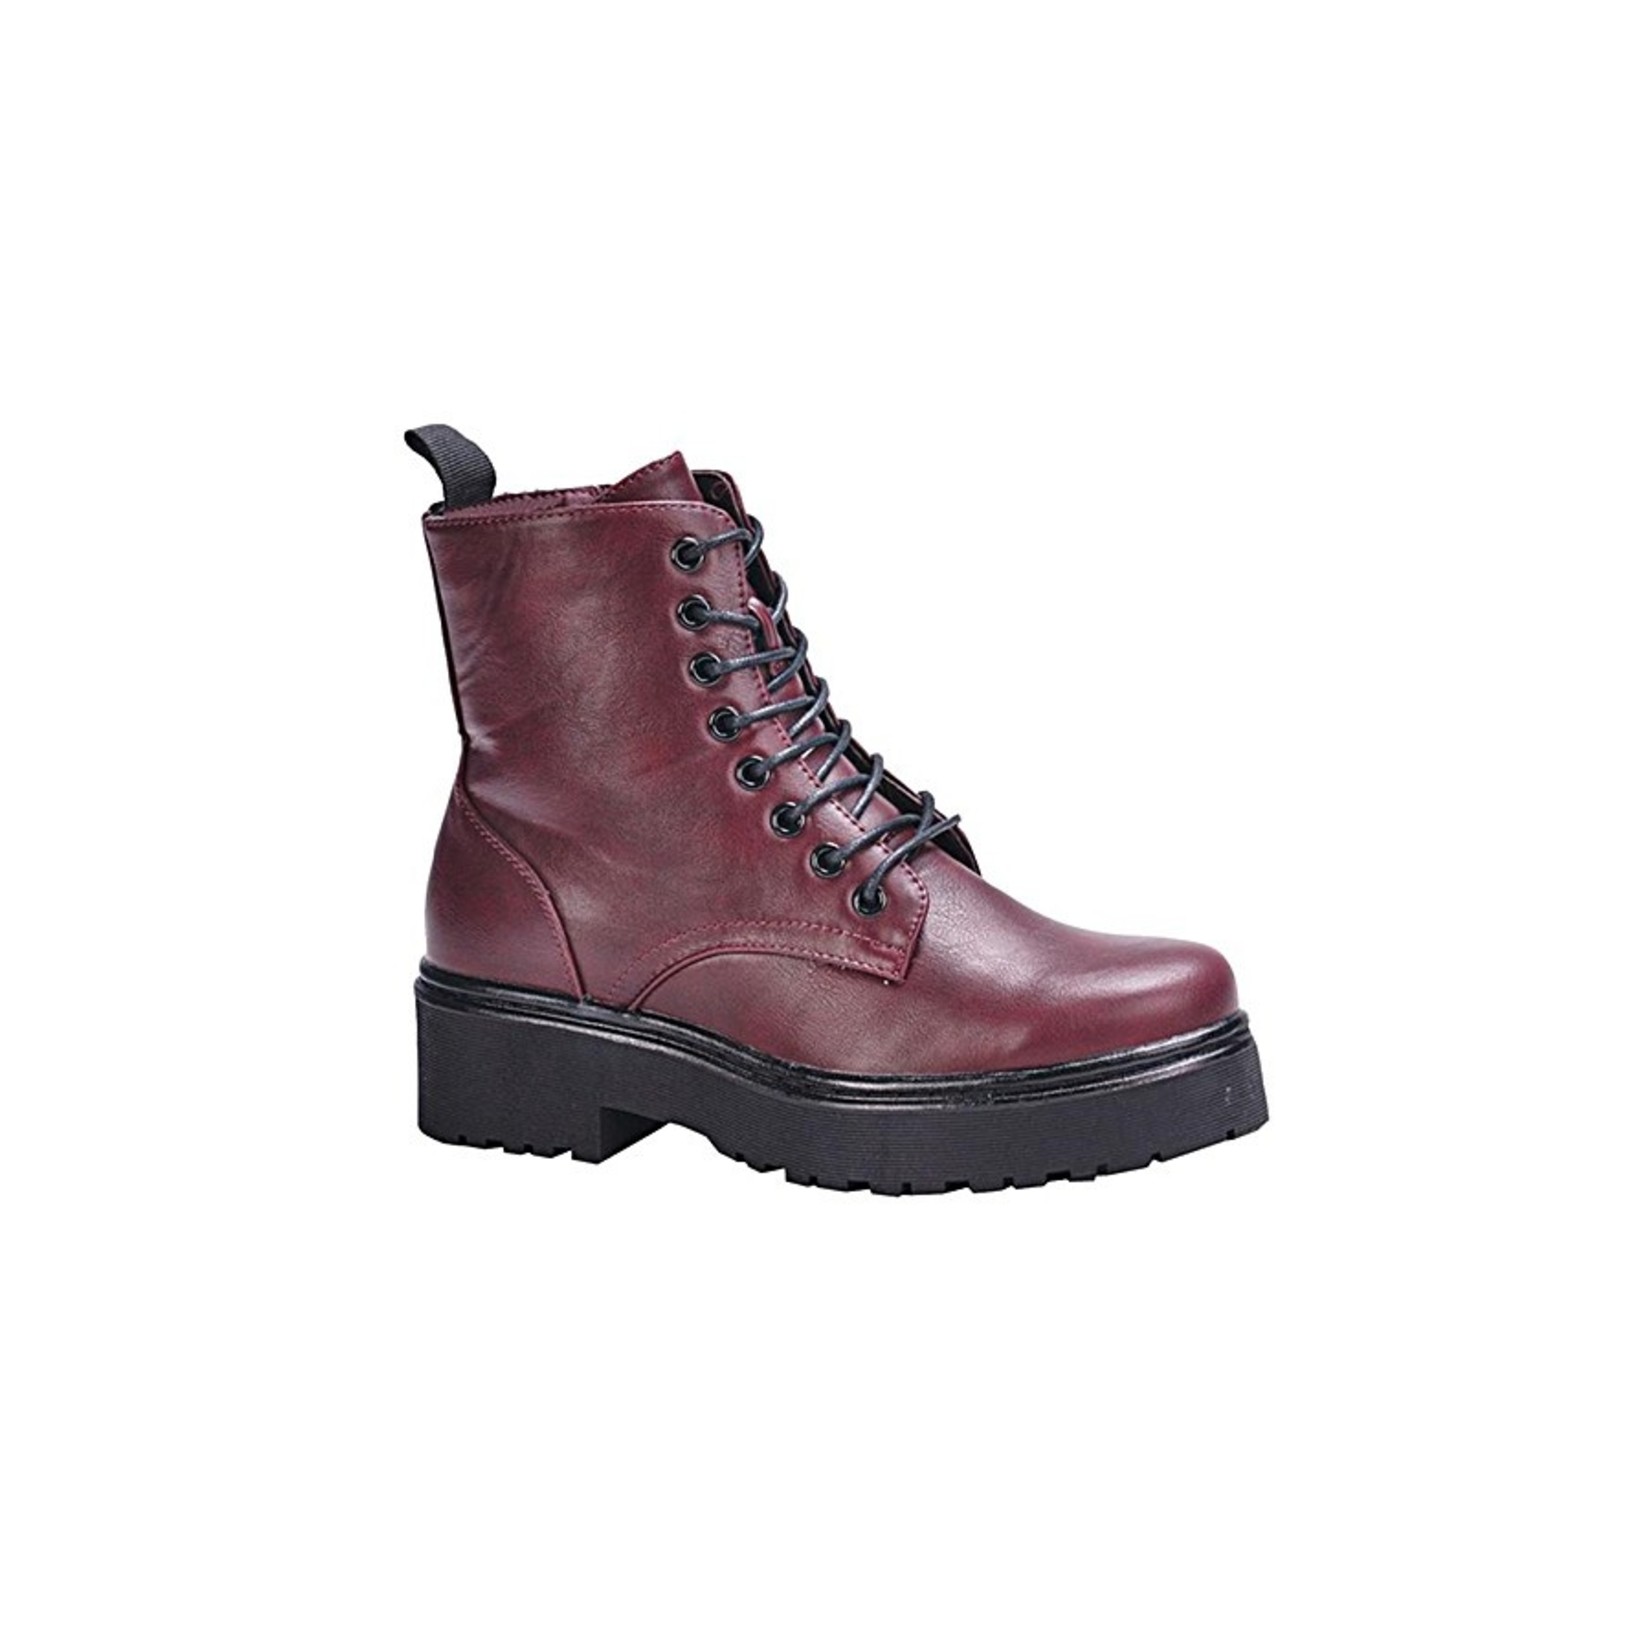 A Rider Girl Rocky Combat Boot